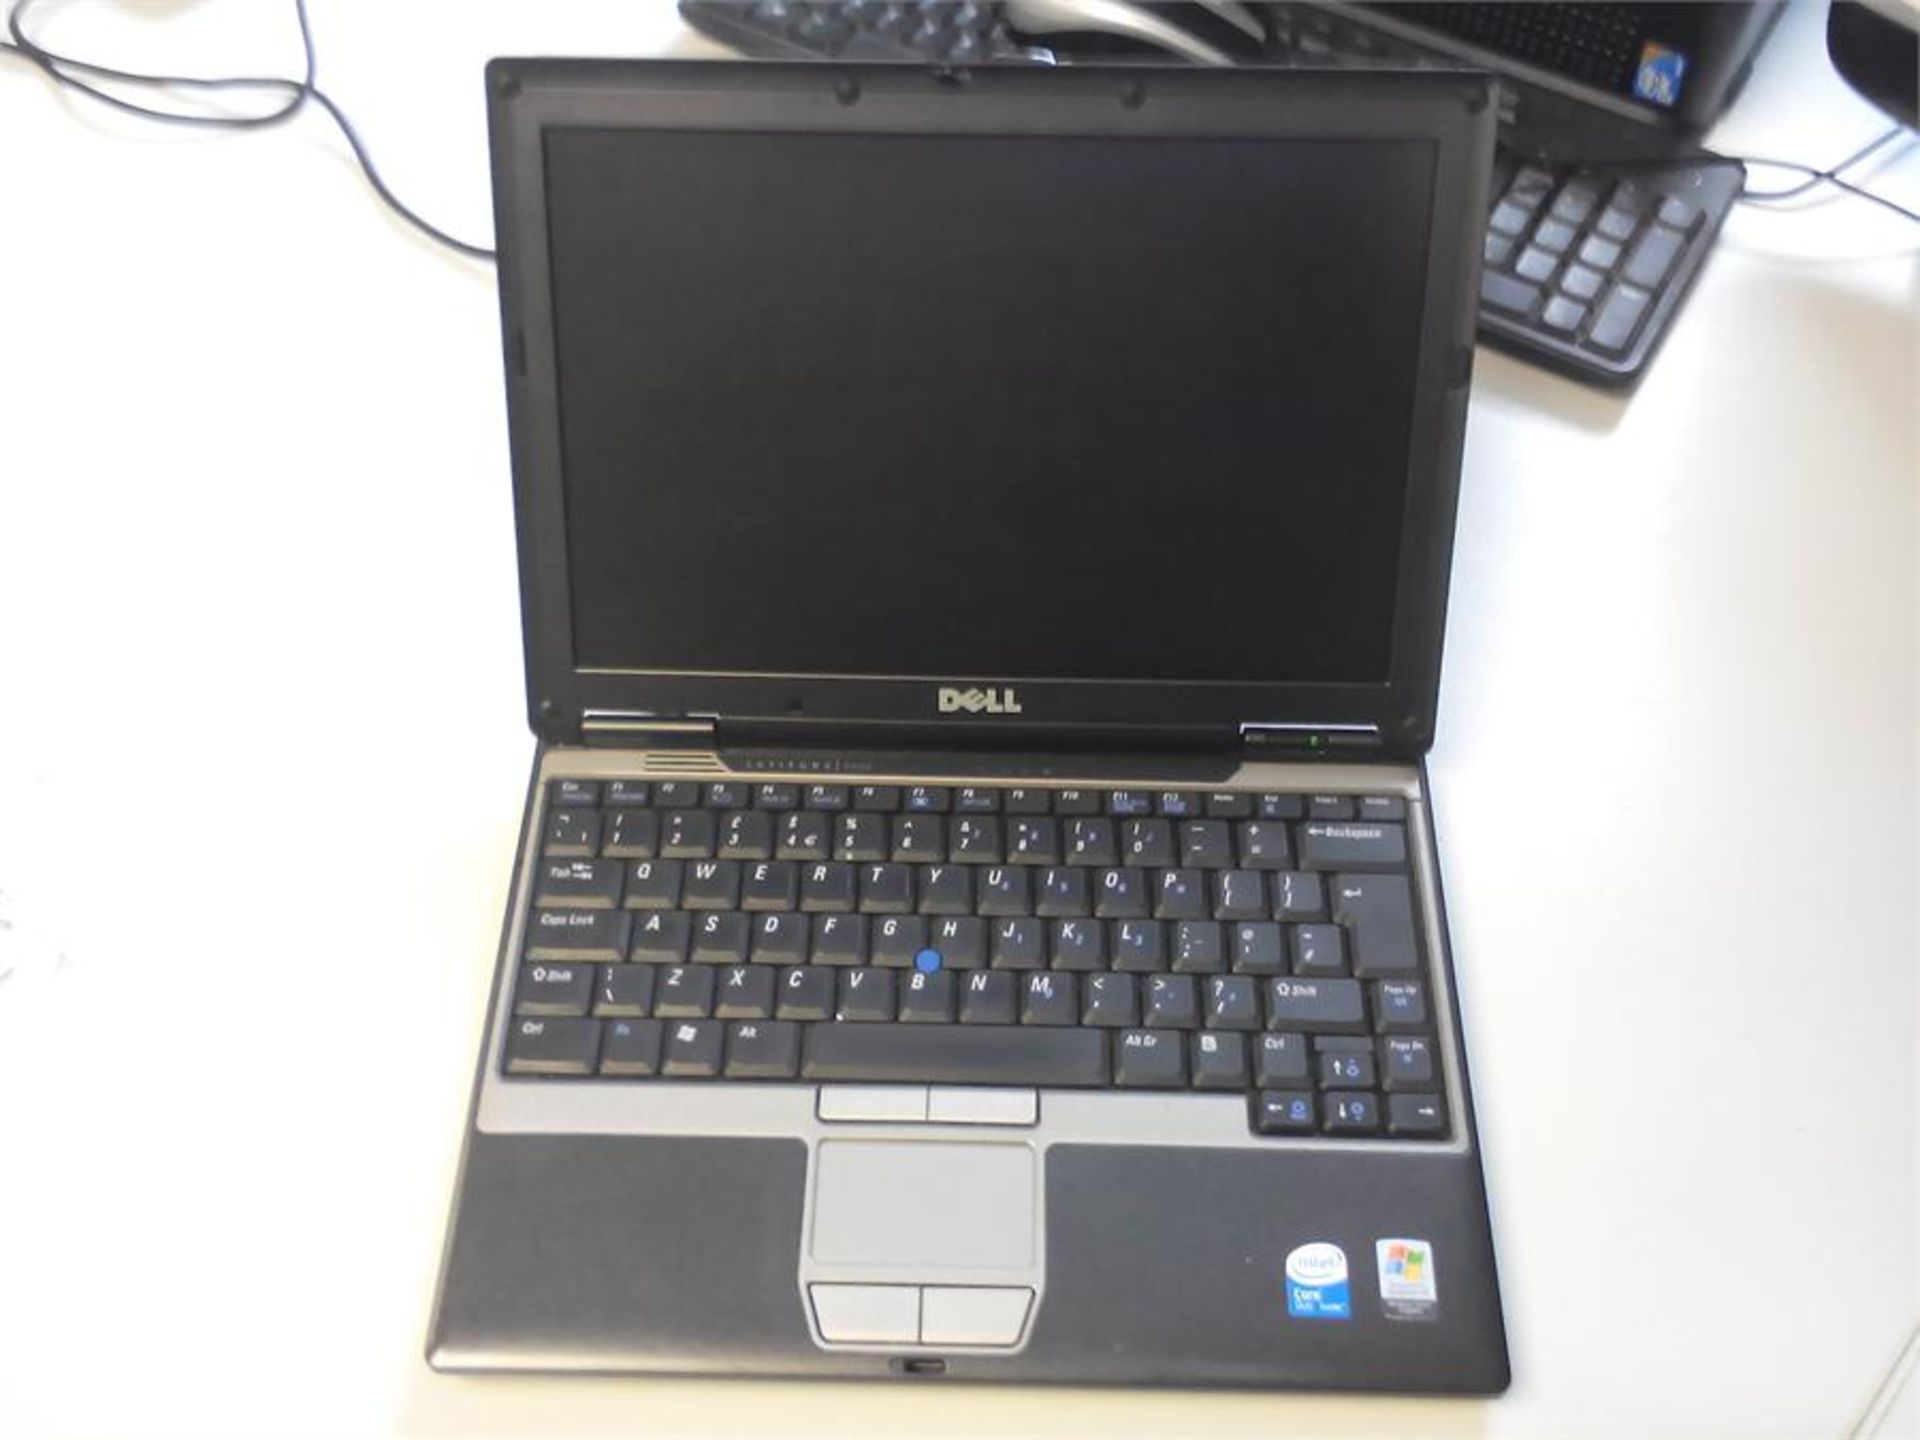 Dell D420 Intel Core Duo 1.2Ghz 1.5Gb 80Gb EXT DVD Windows Xp Pro Installed - Image 2 of 3